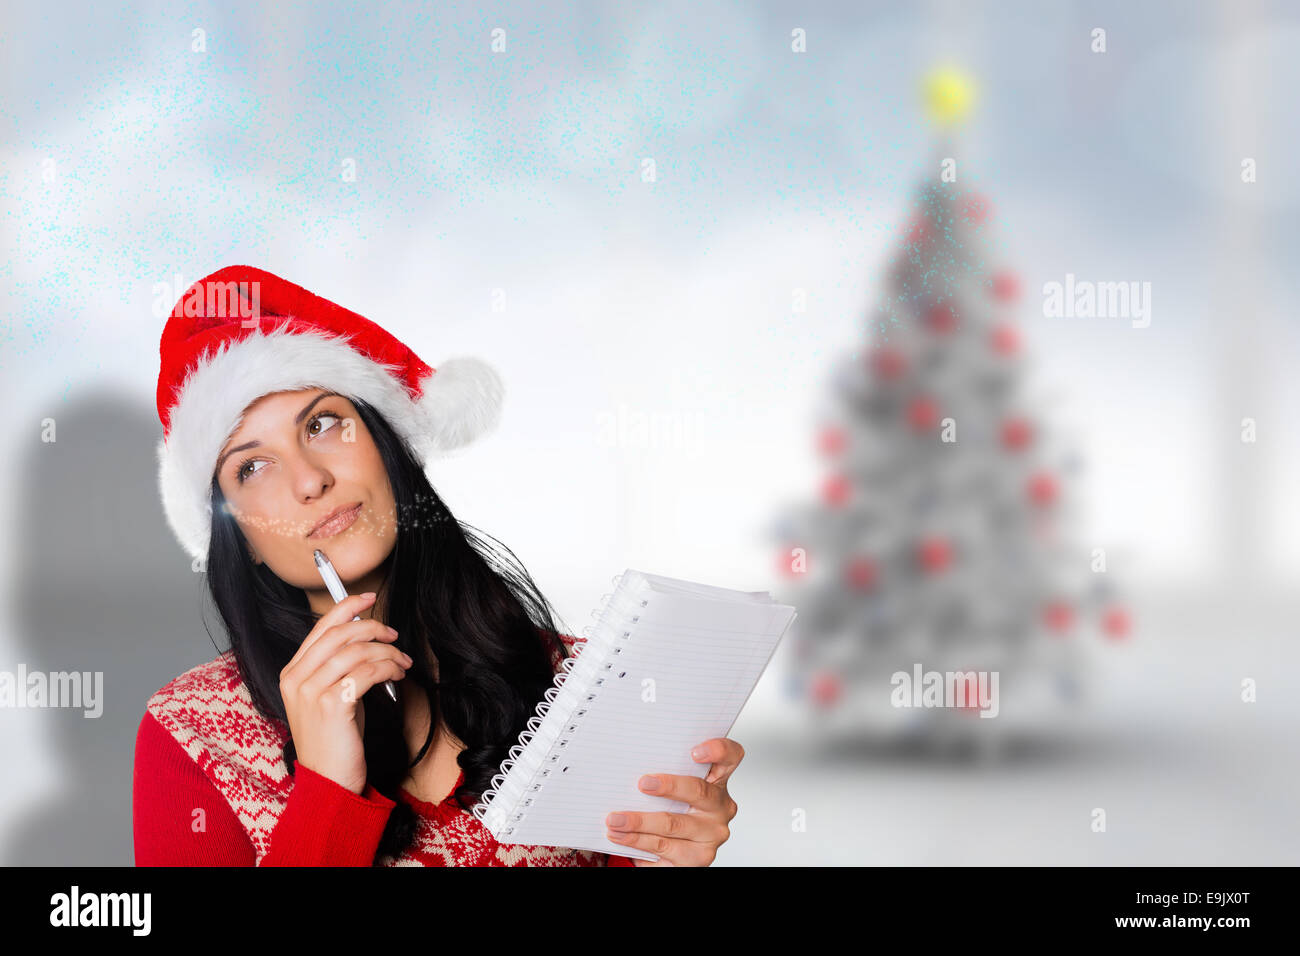 Composite image of woman thinking what to write Stock Photo